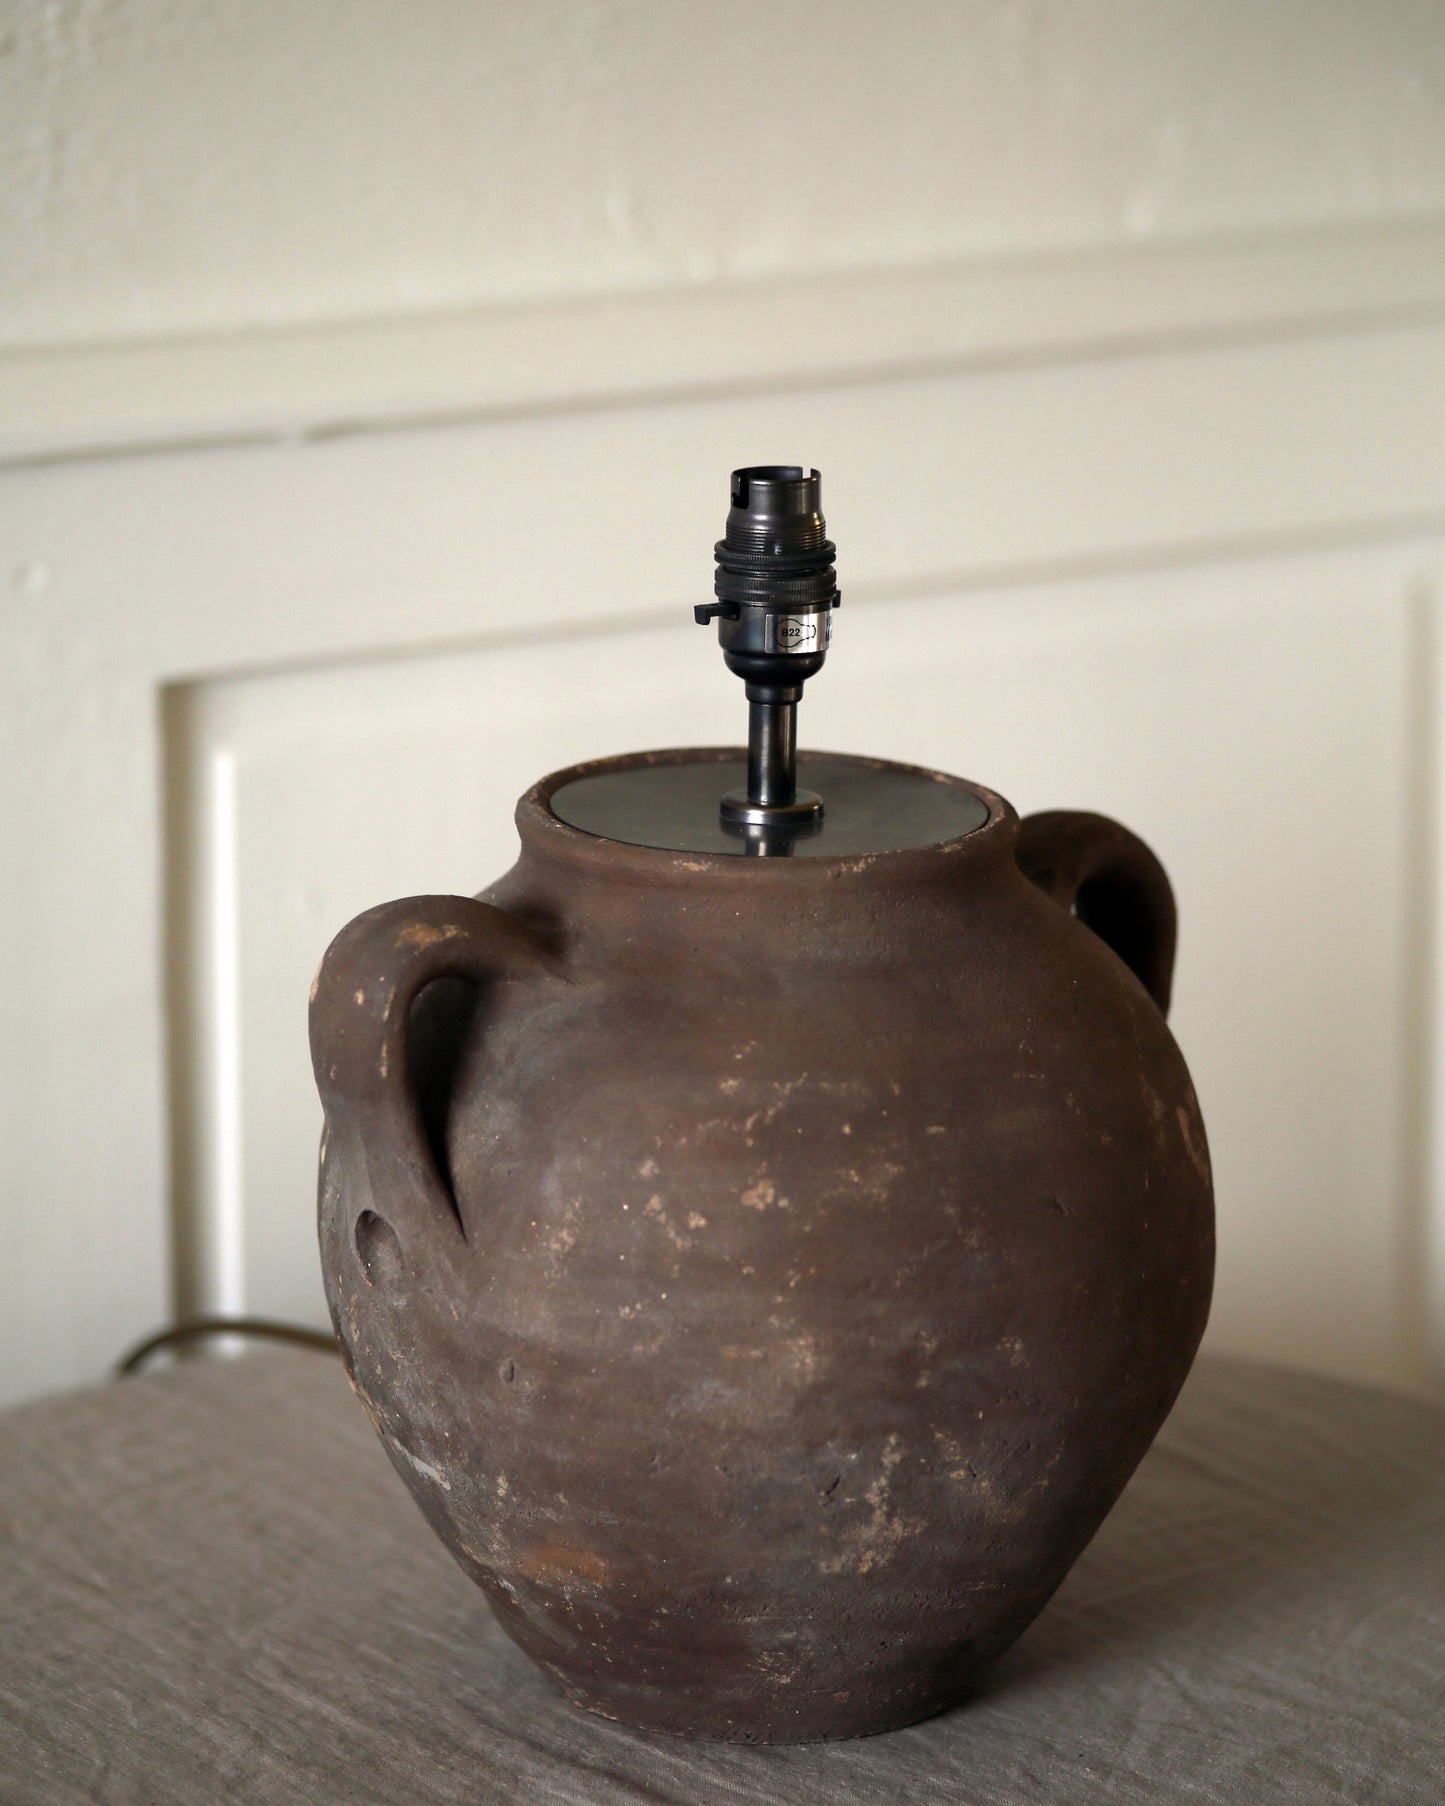 Rustic aged patina and handle detail of clay pottery lamp base